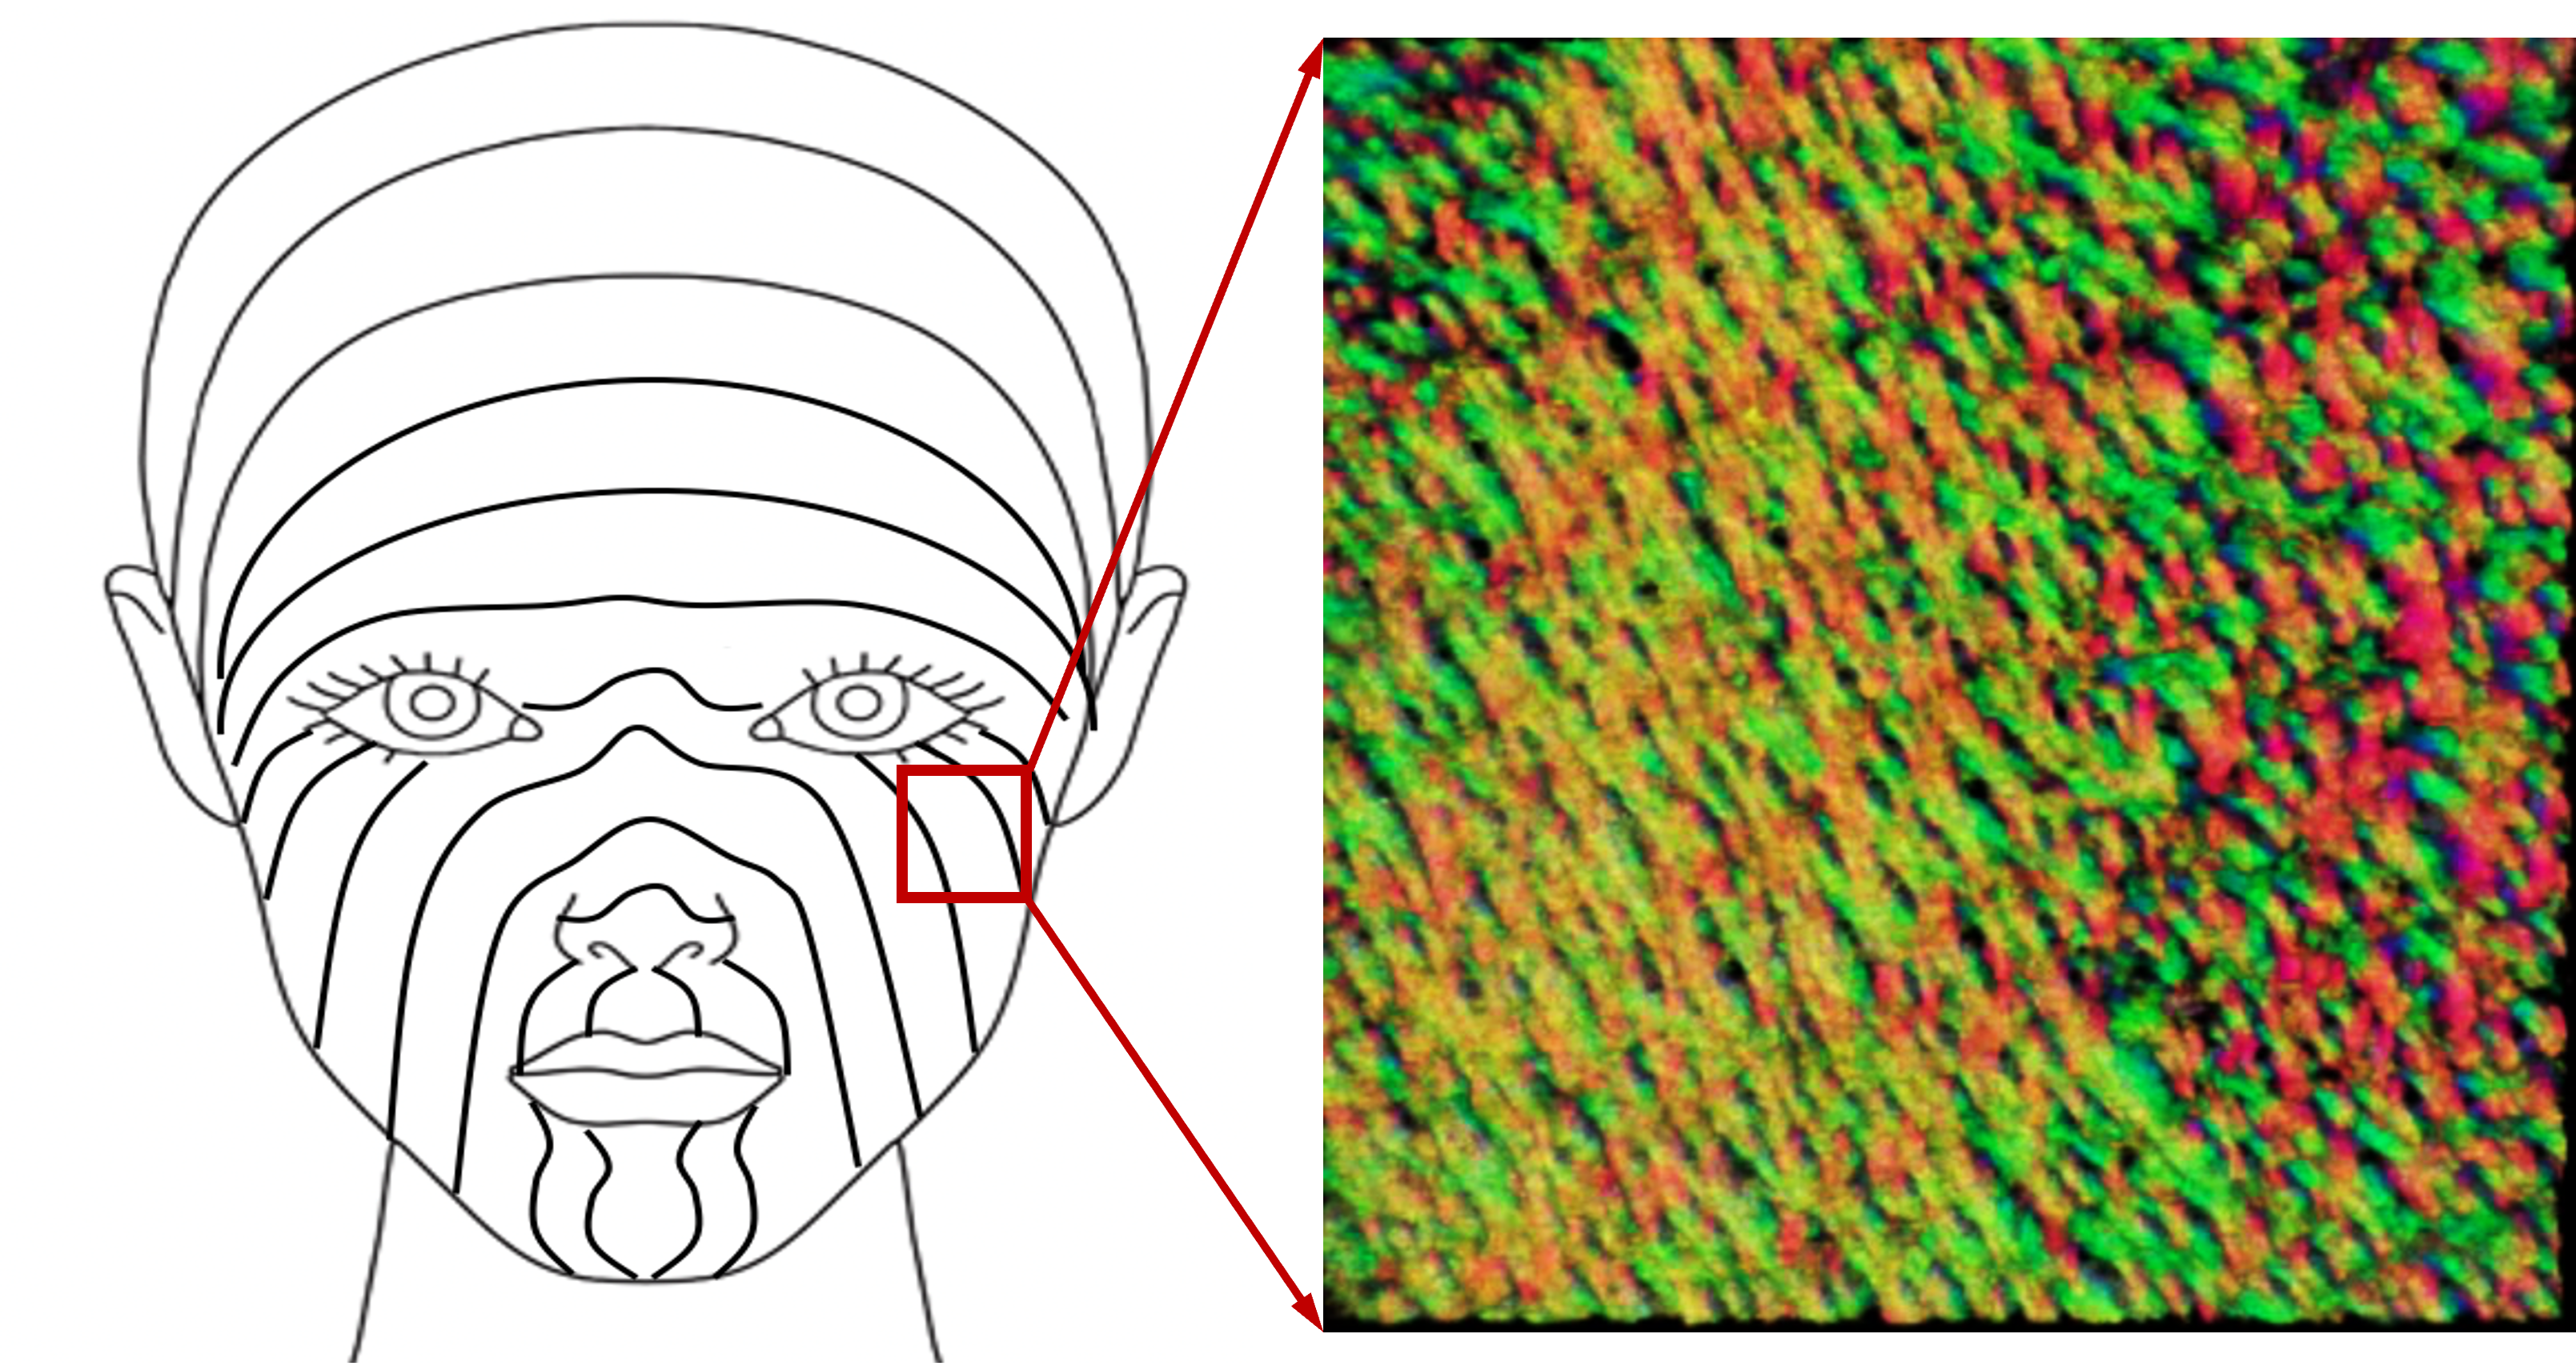 Drawing of tension lines of face and medical imaging of collagen structure under skin 